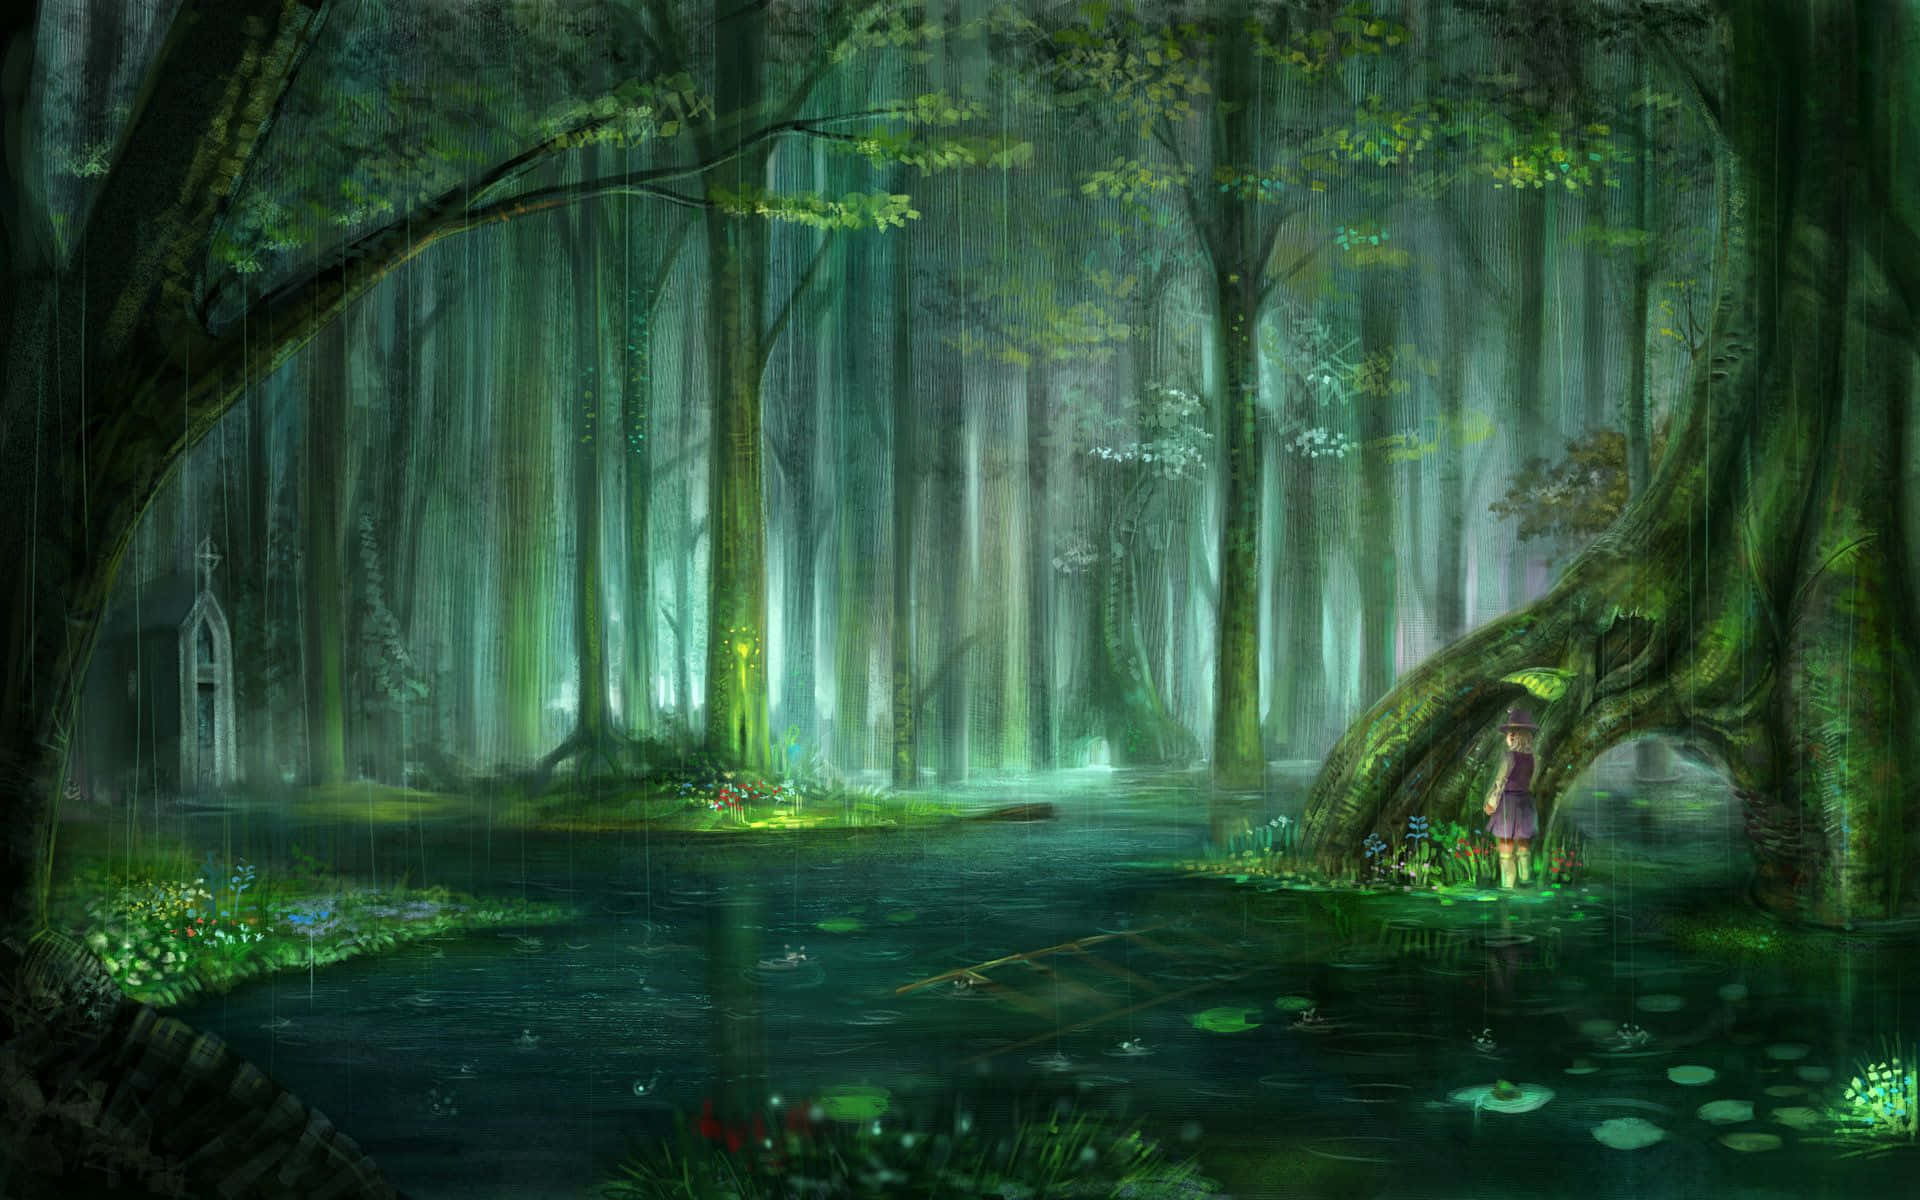 A Fairytale Forest Shining in the Moonlight Wallpaper